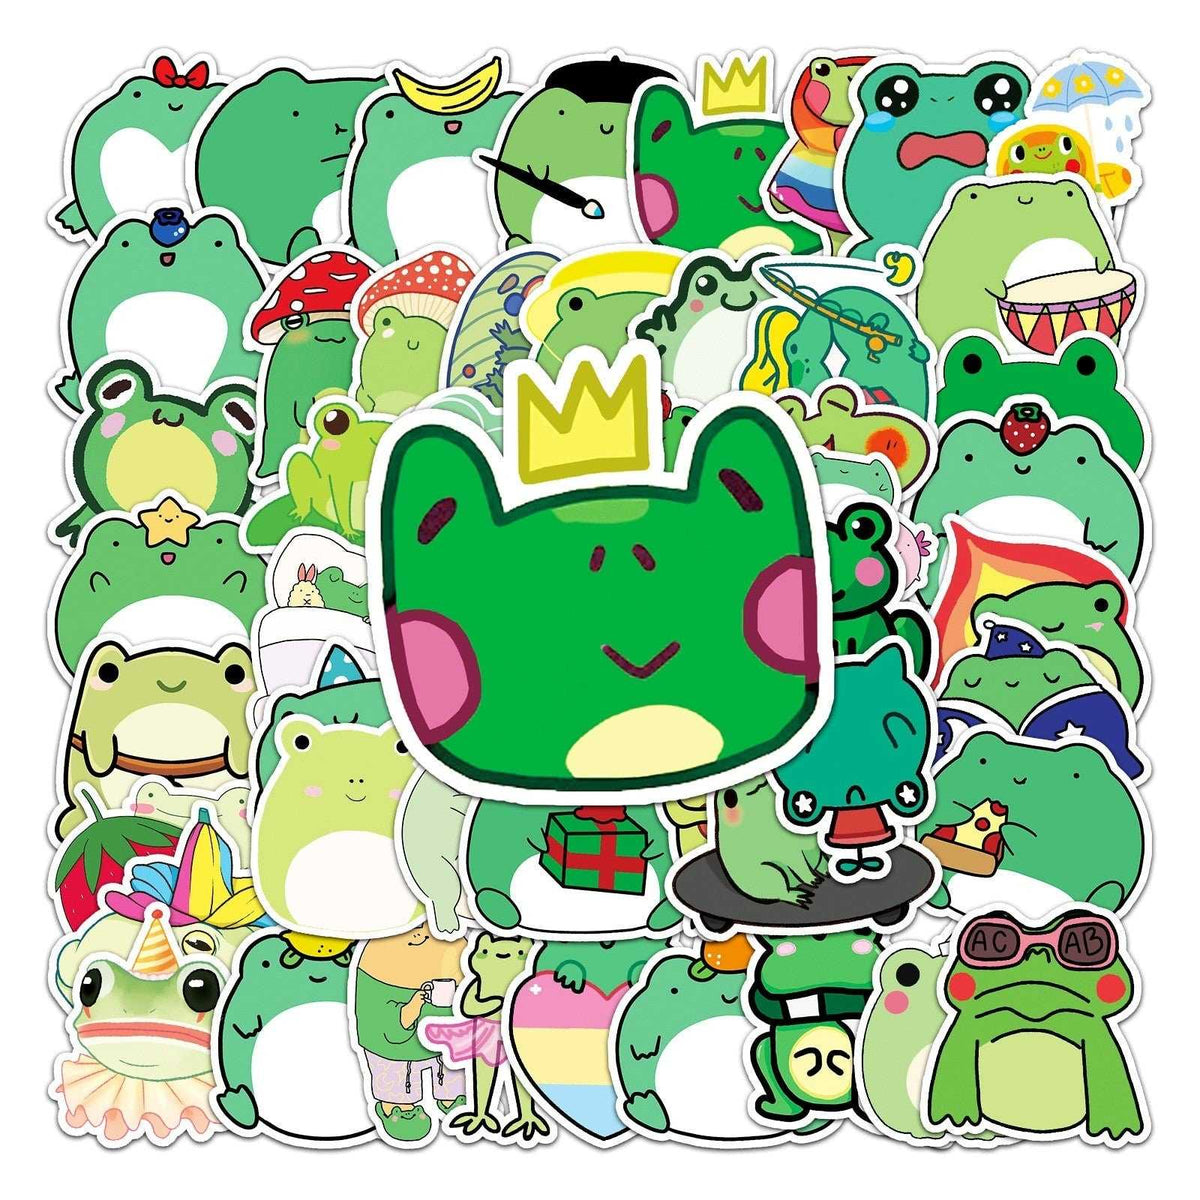 Frog Stickers Pack: Adorable and Versatile-ChandeliersDecor